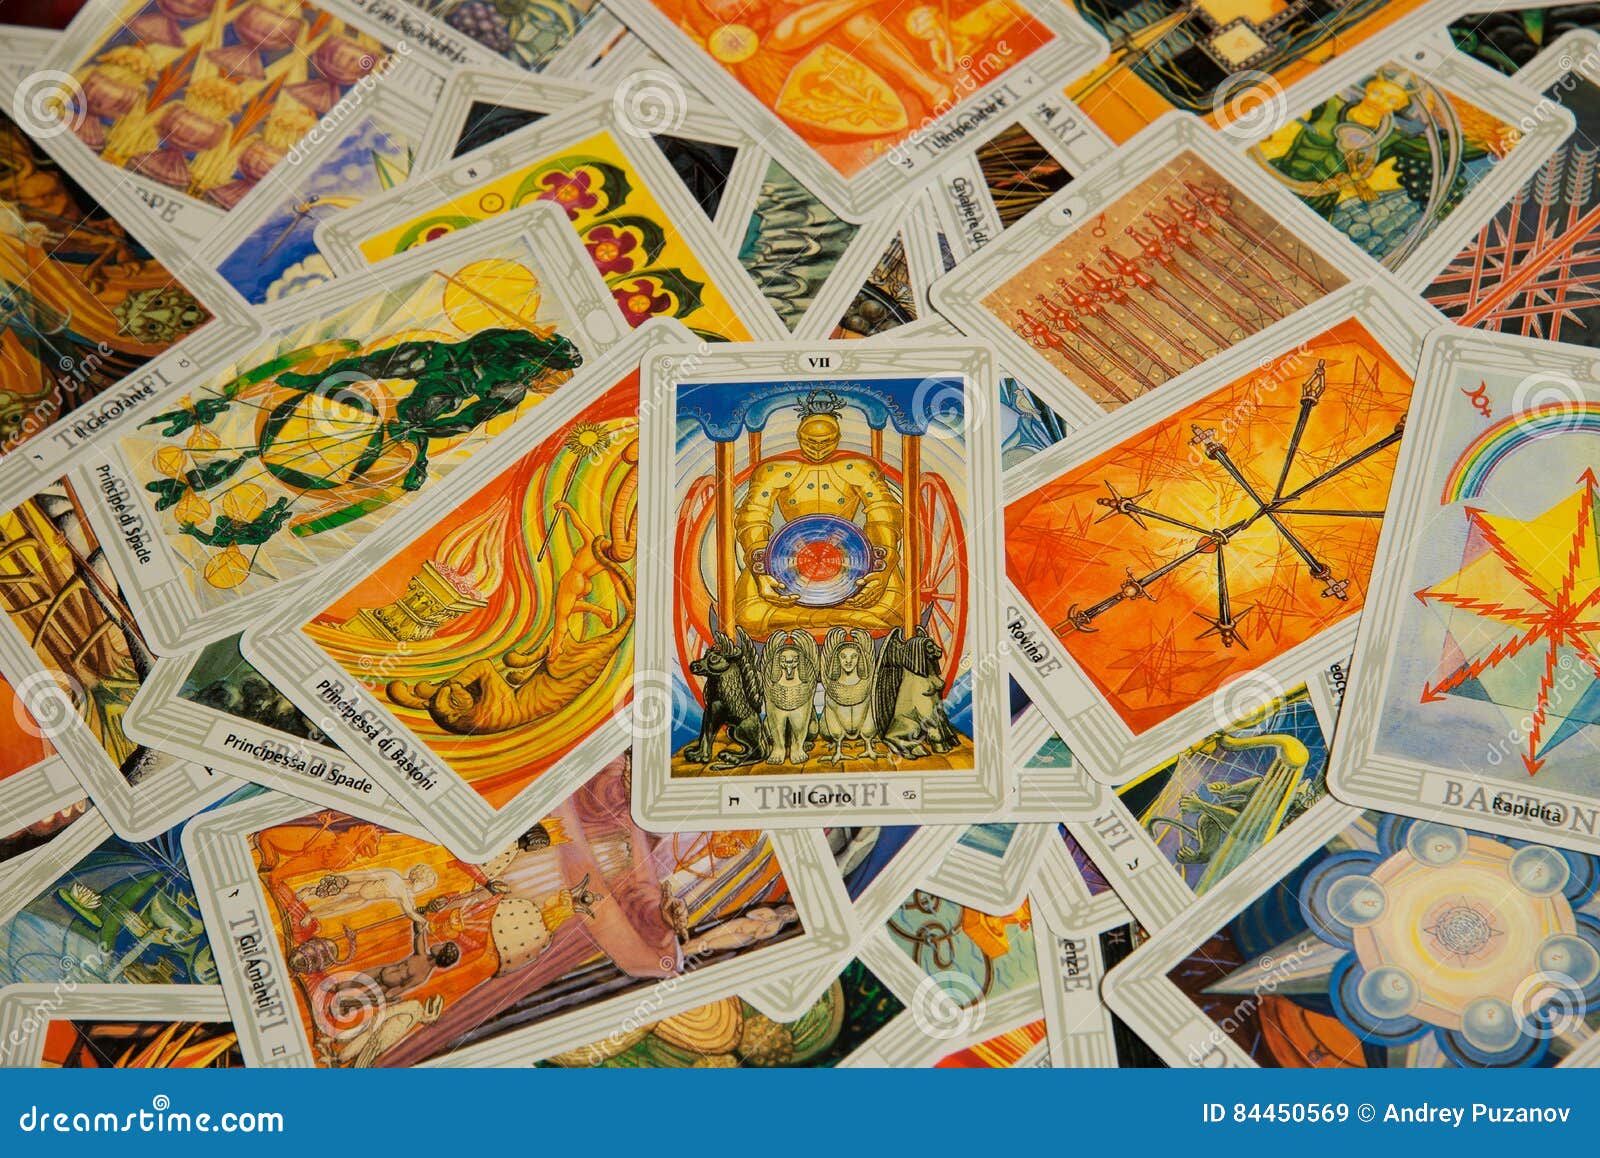 Tarot the Chariot. Deck. Stock Image - of cards, prediction: 84450569